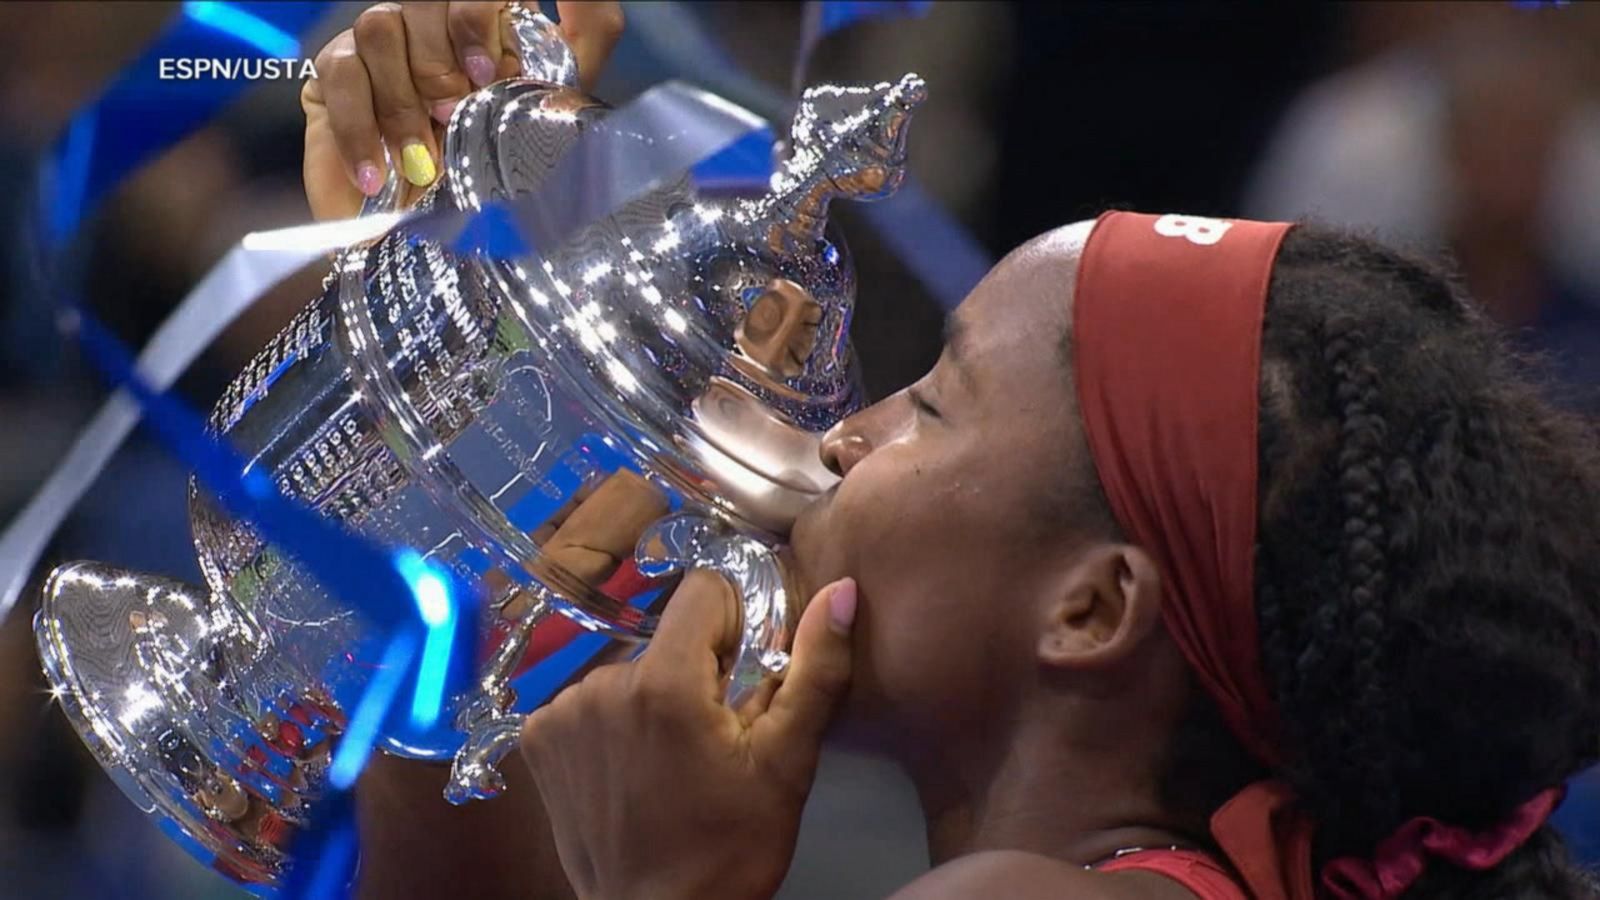 Coco Gauff makes history in a thrilling 3-set match - Good Morning